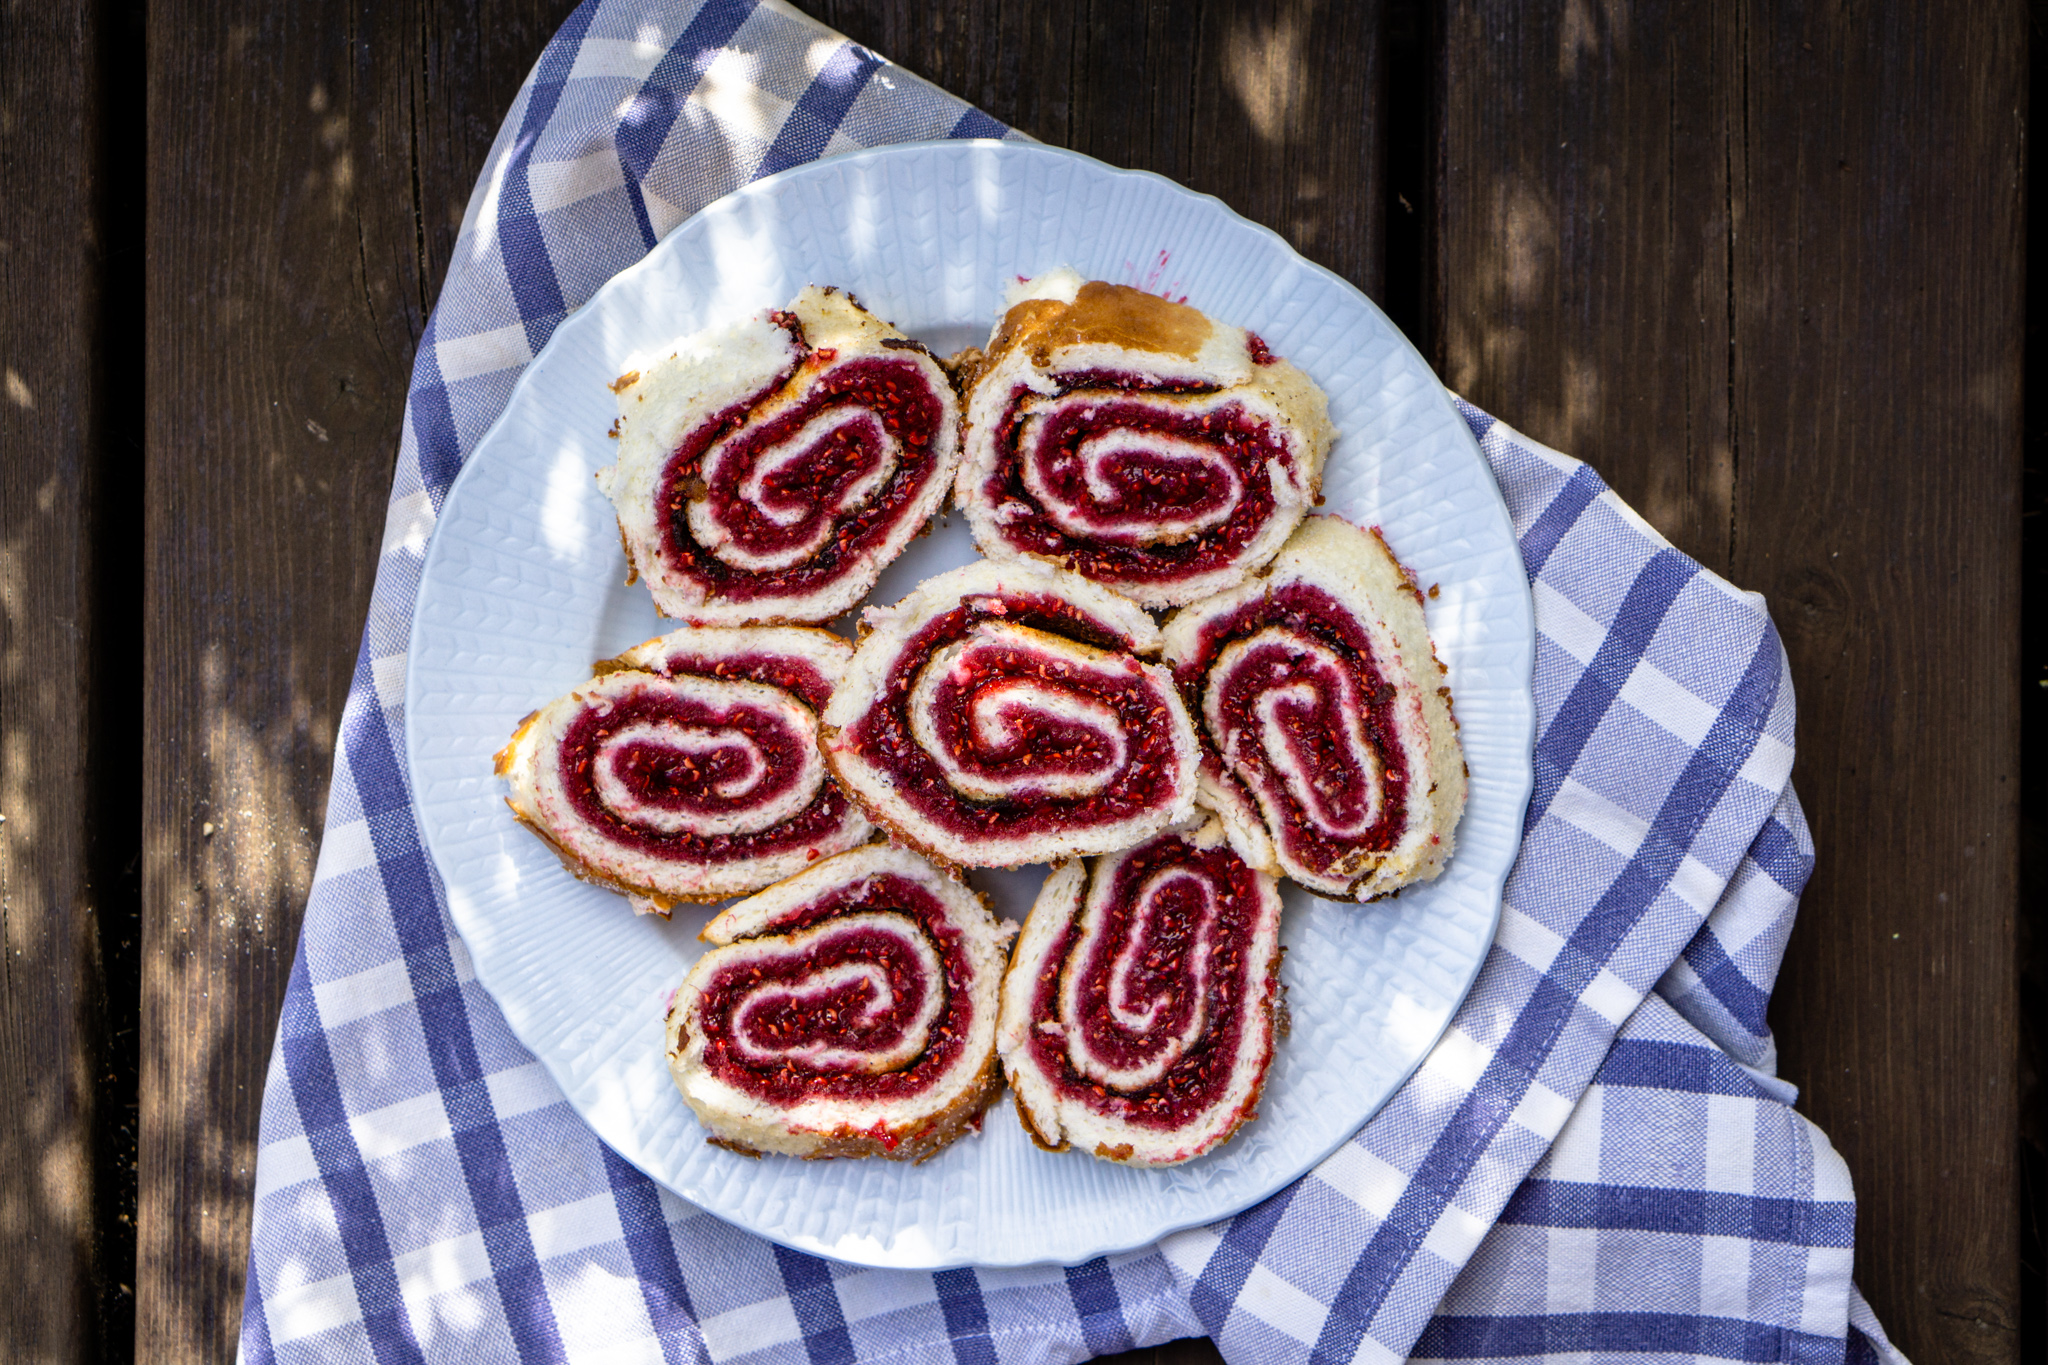 rulltårta — Swiss roll, or jelly roll, or roly-poly — Swedish style